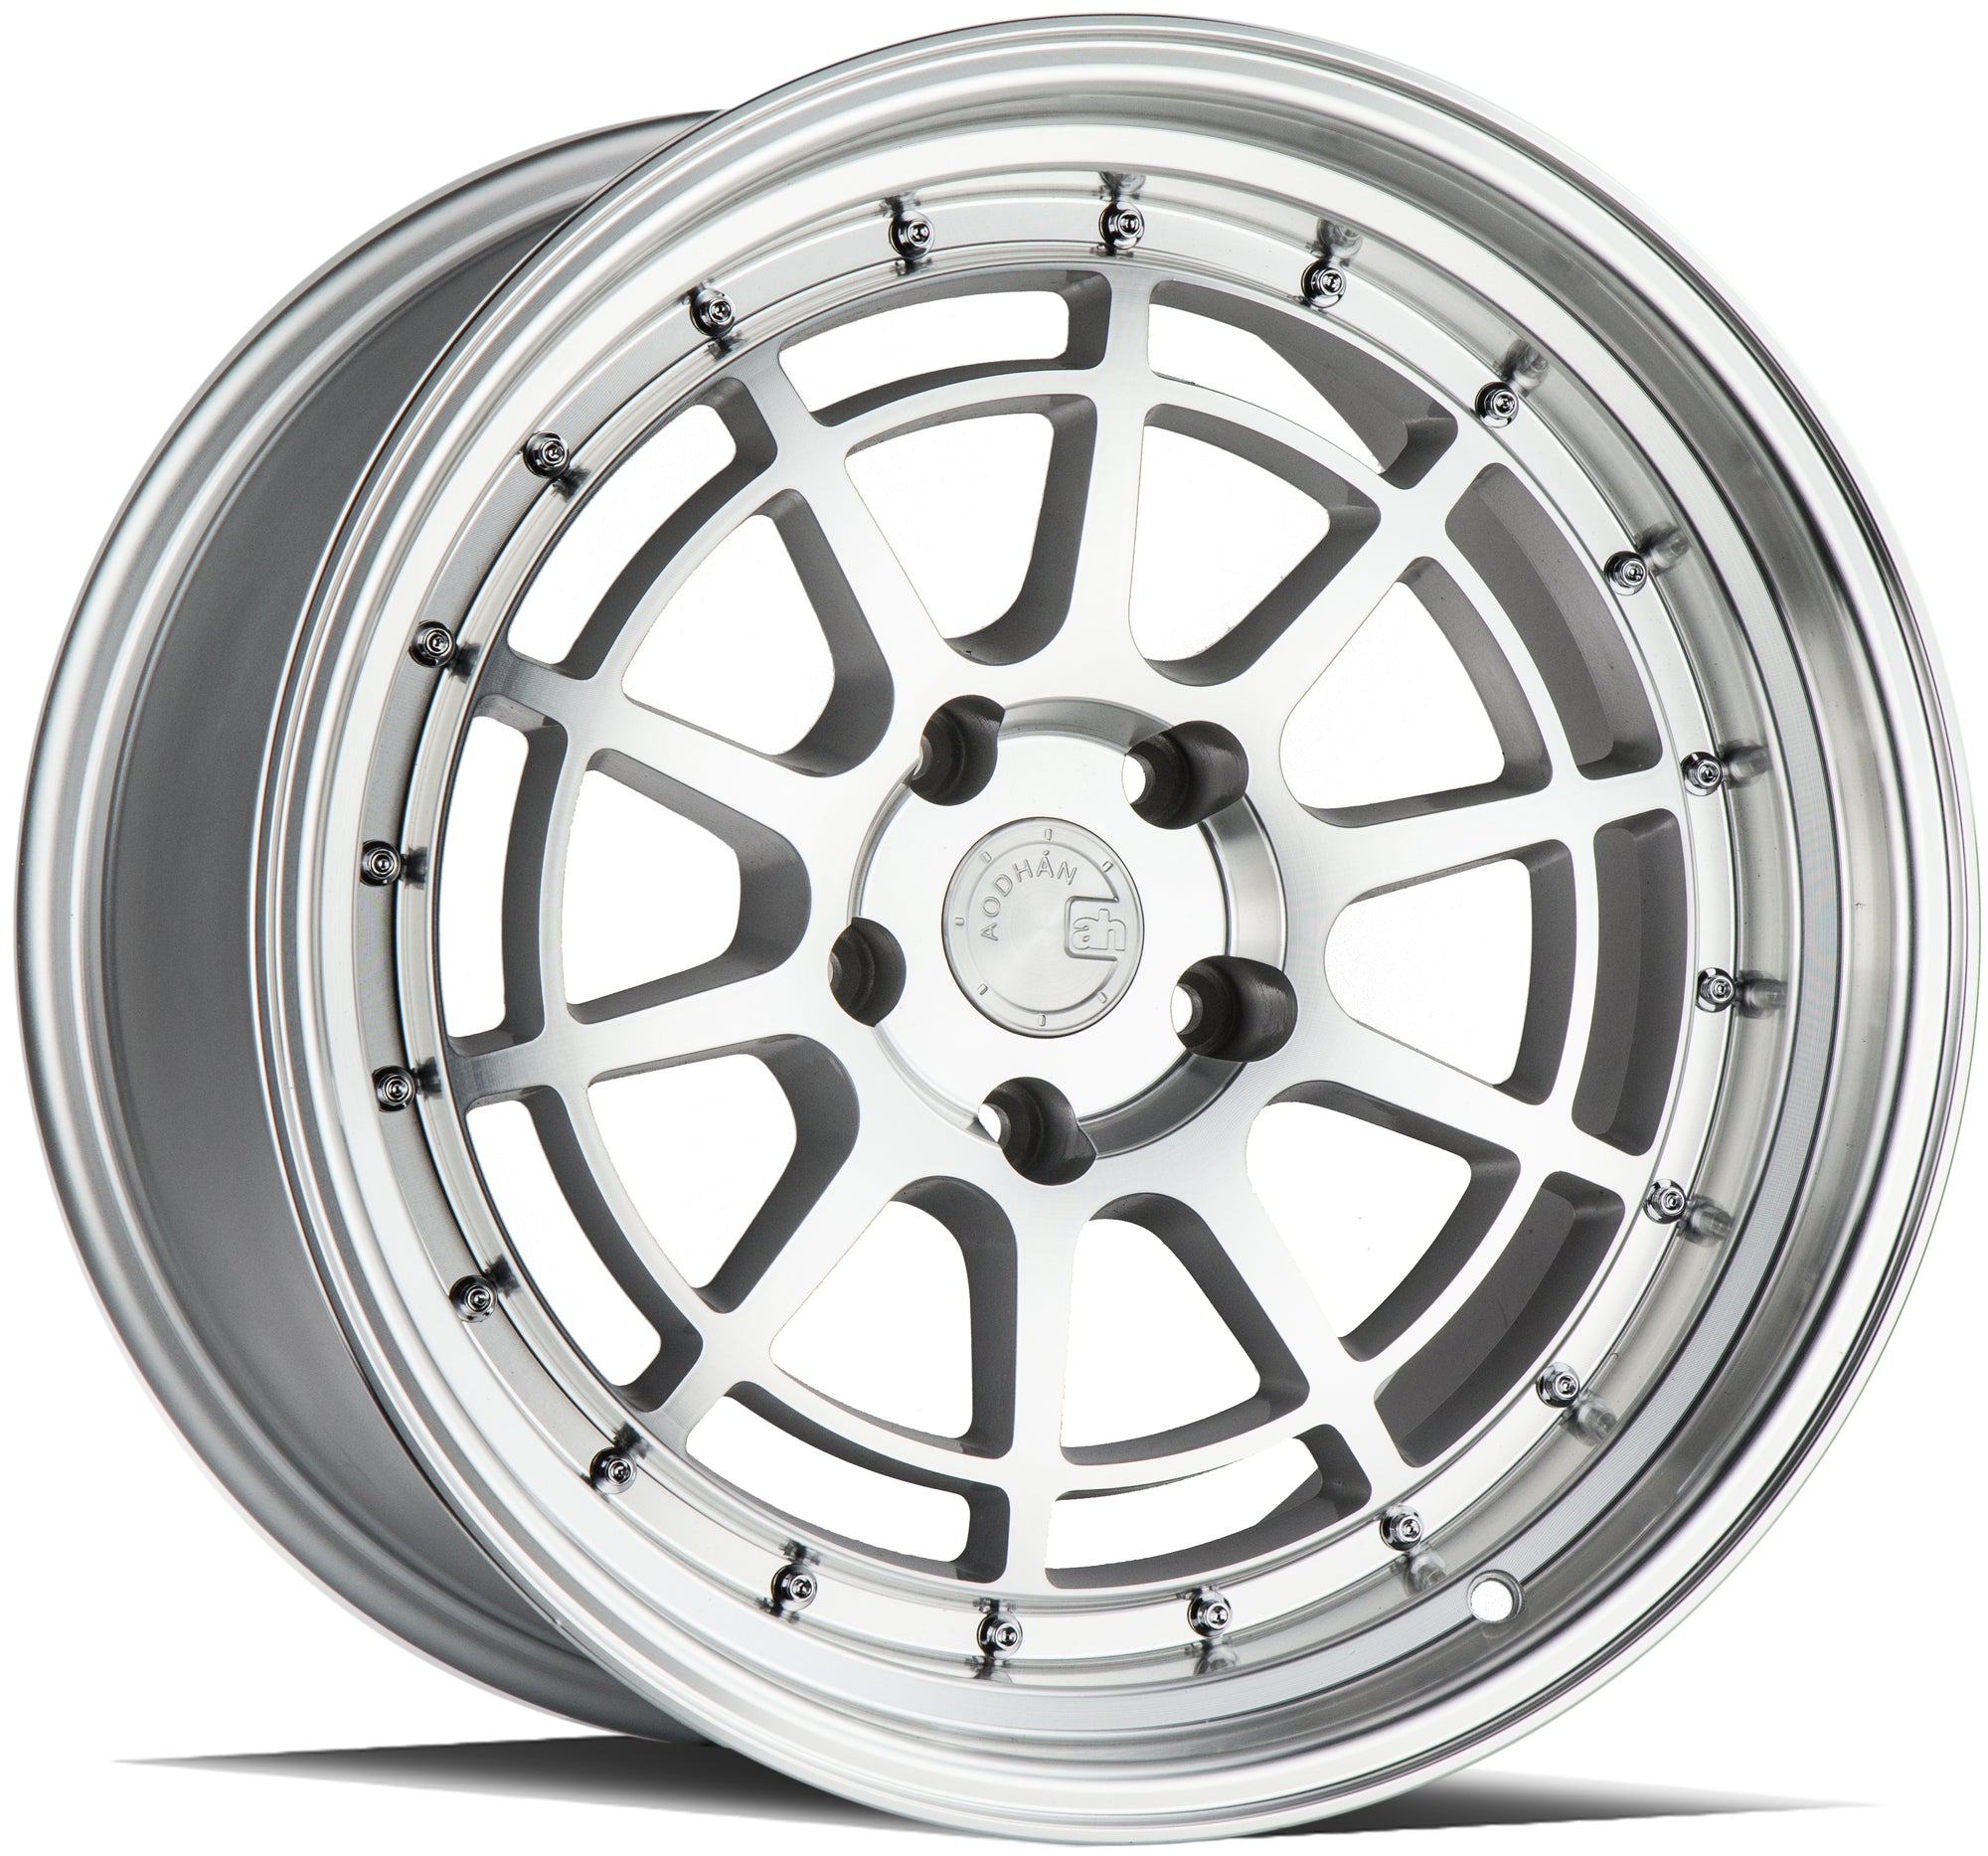 Aodhan AH04 18x10.5 5x114.3 +25 Silver Machined Face And Lip